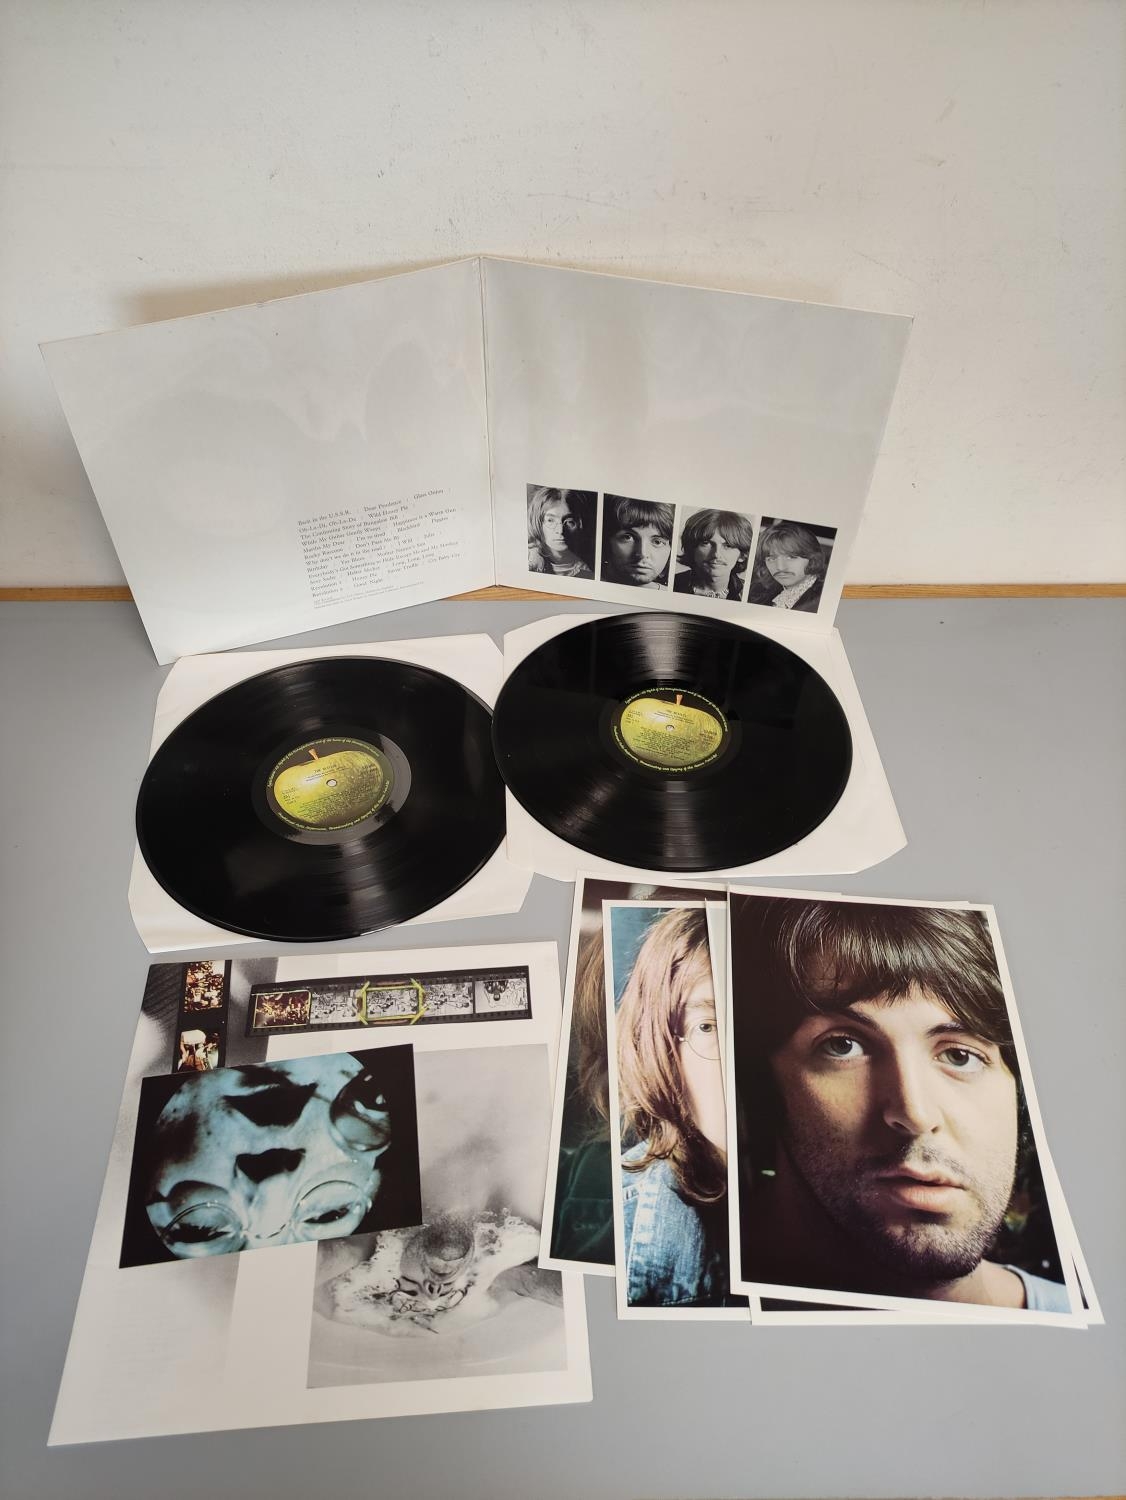 The Beatles Collection 13 Lp box set UK 1978 pressing (BC13), the White album, complete with - Image 9 of 11